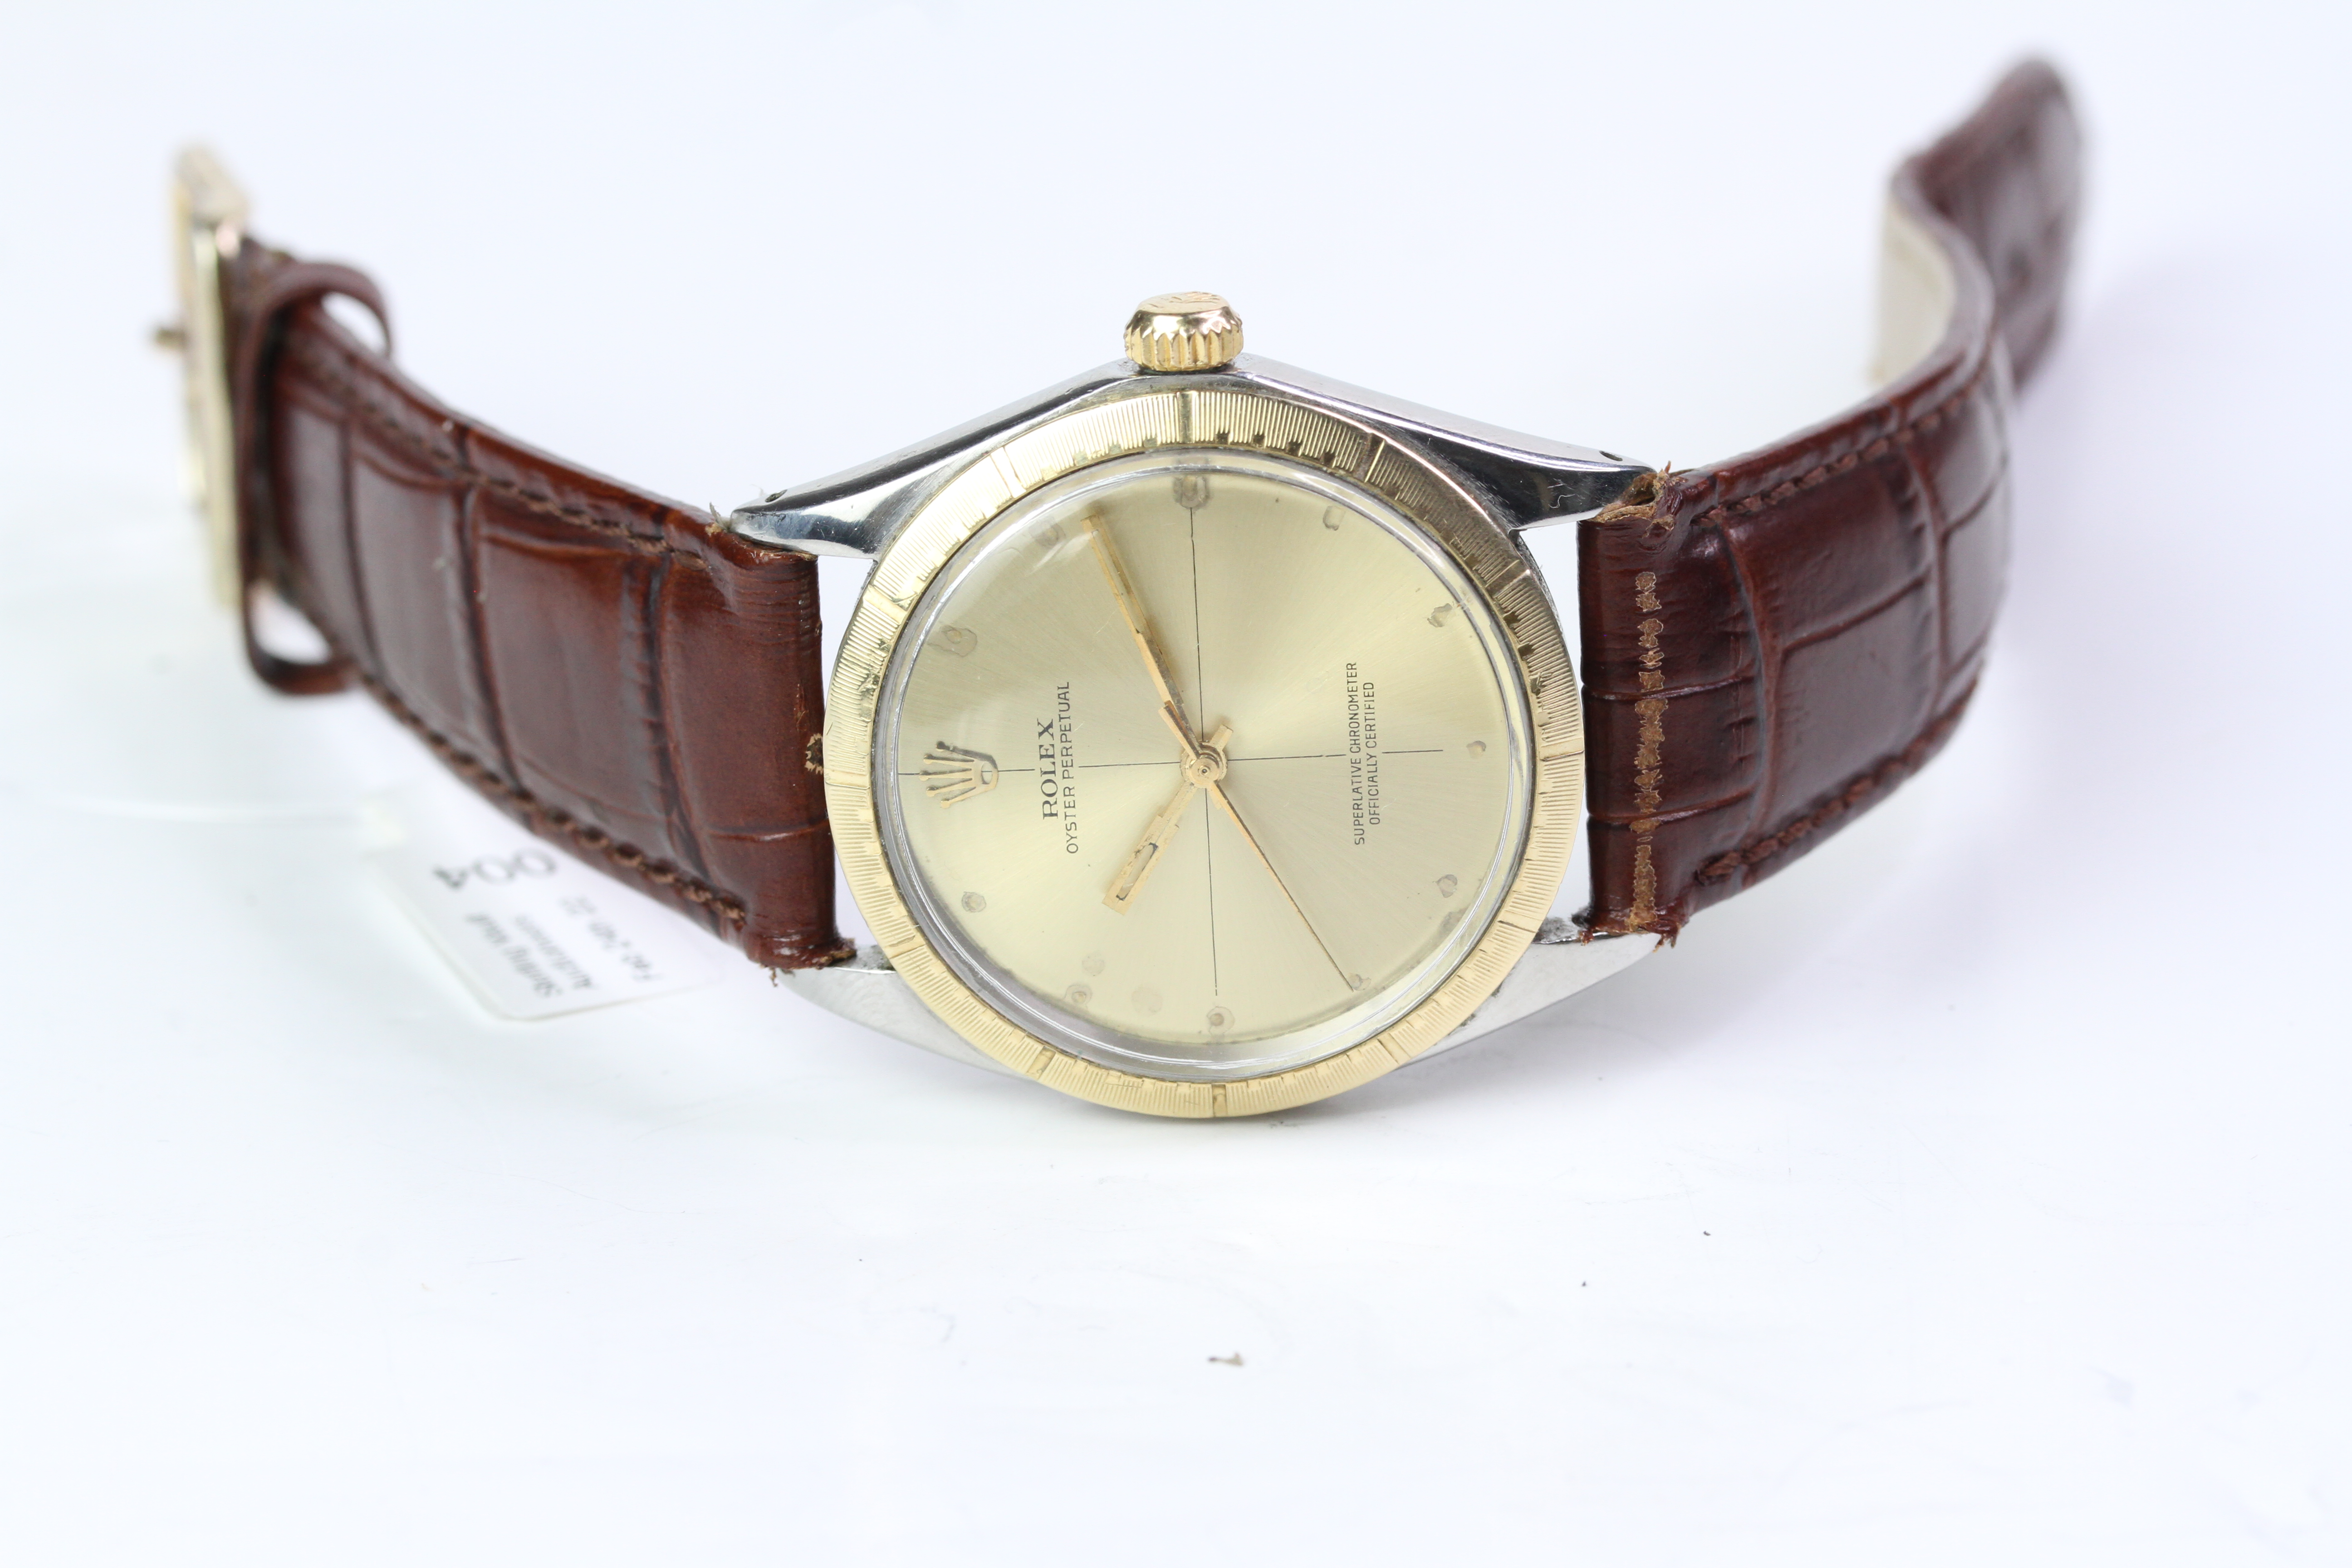 VINTAGE ROLEX OYSTER PERPETUAL 'ZEPHYR' DIAL REFERENCE 1038 CIRCA 1972, champagne quartered 'Zephyr' - Image 6 of 6